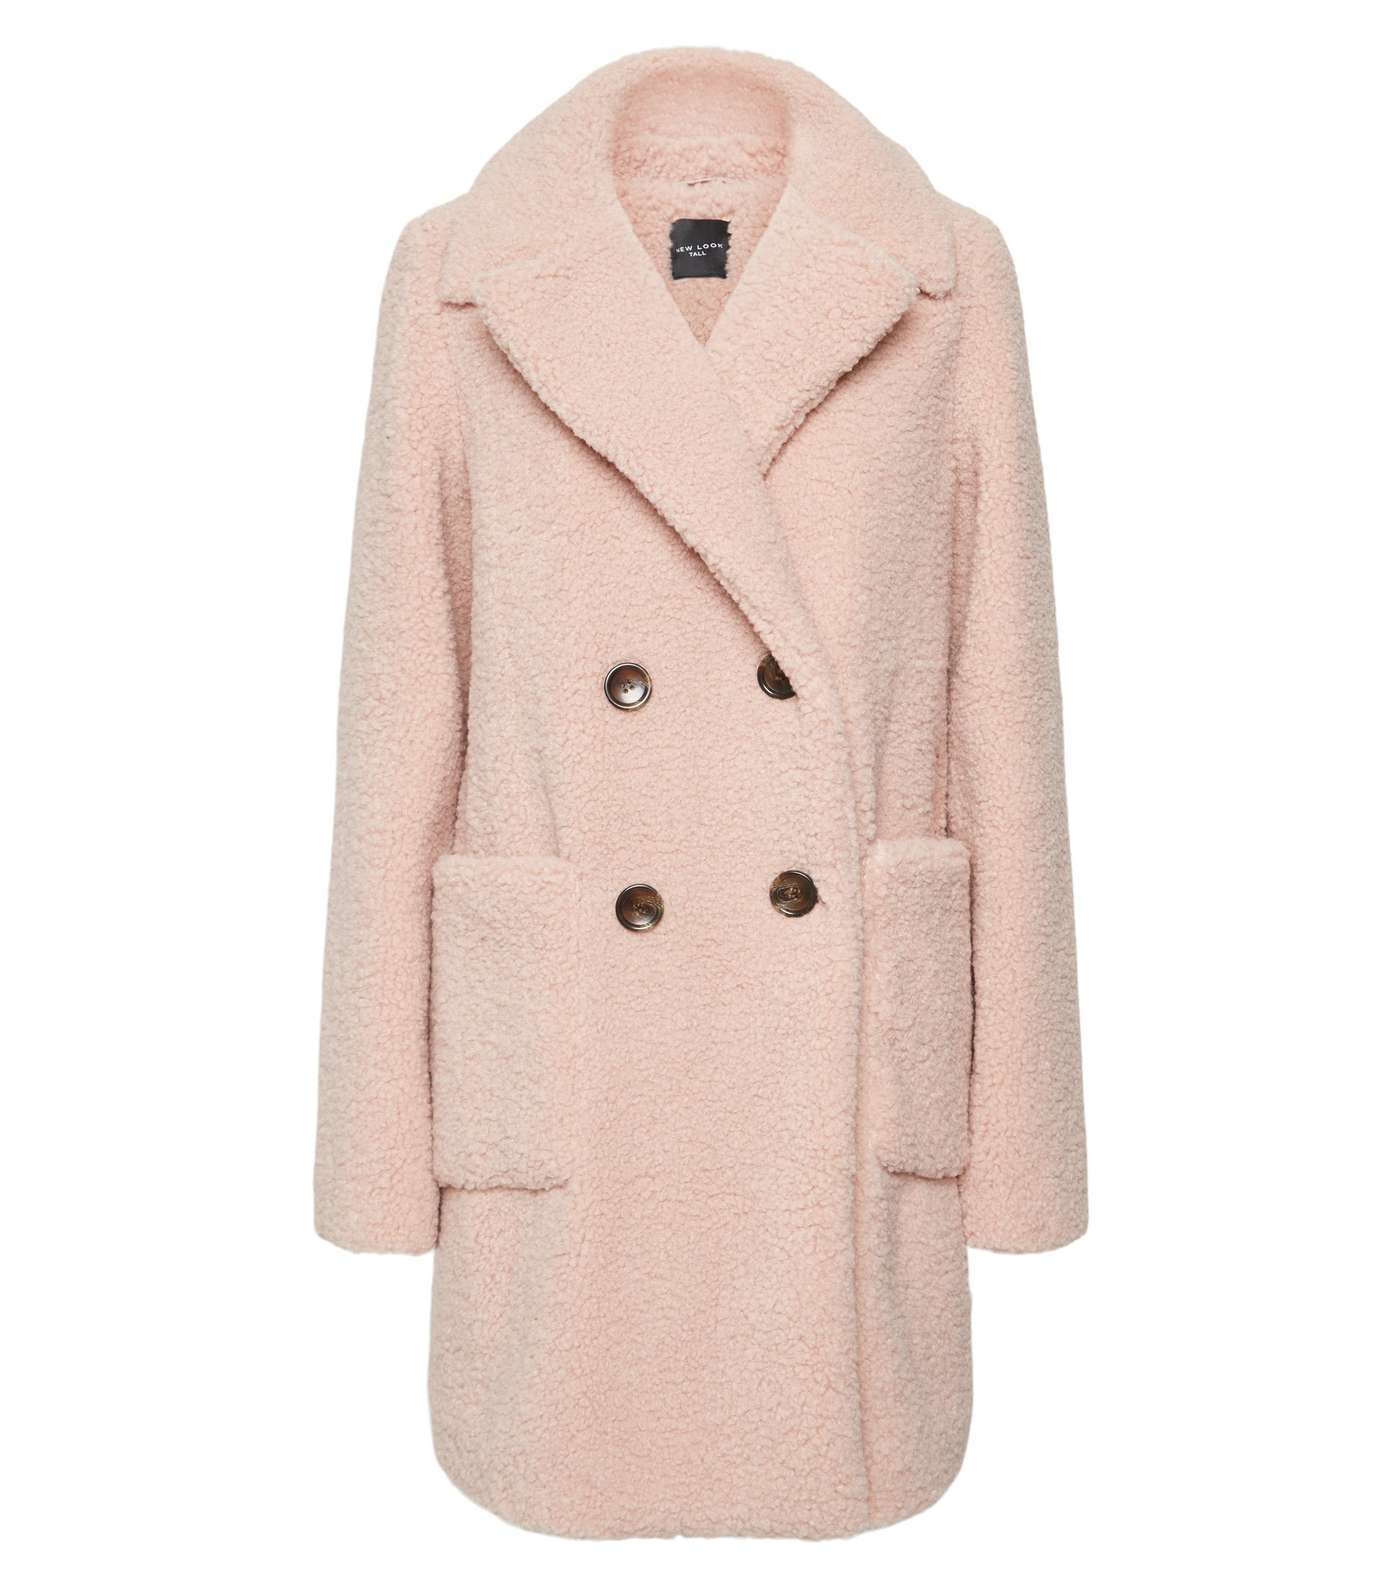 Tall Pale Pink Longline Teddy Coat Image 4